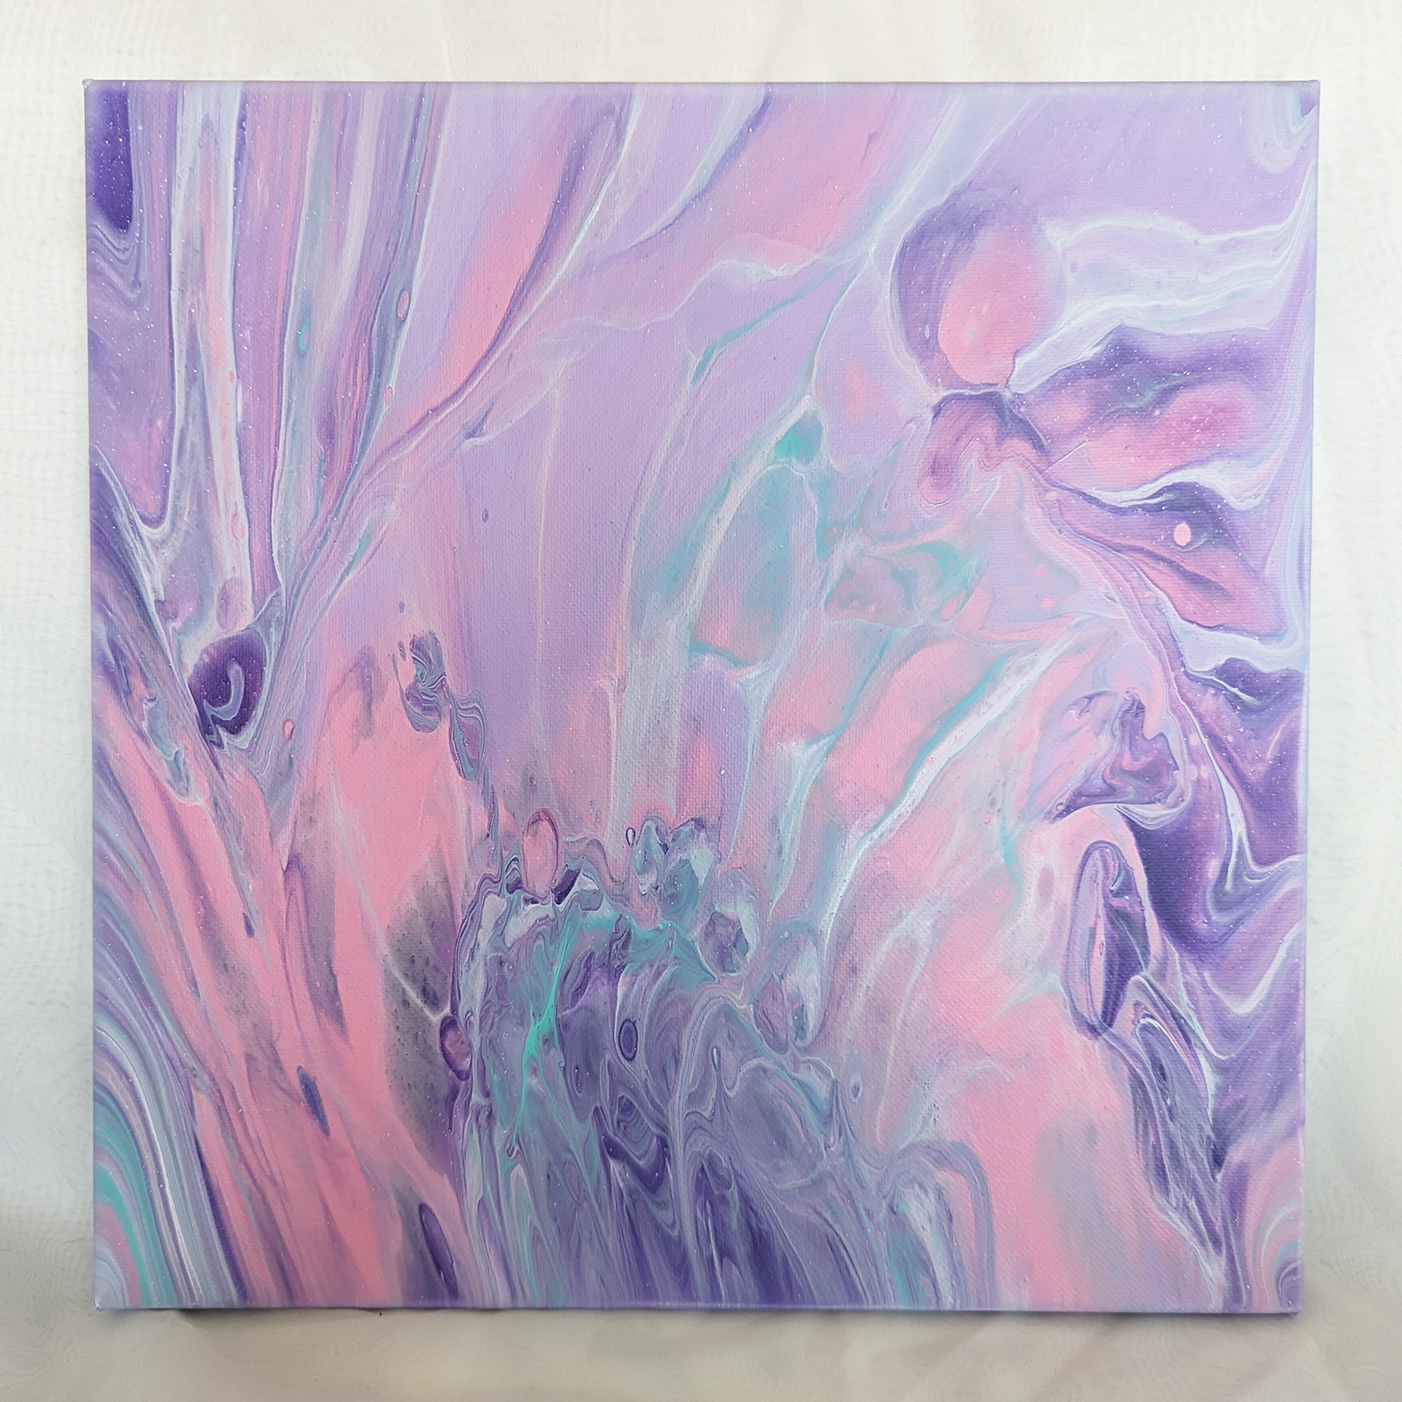 Abstract painting in pastel colors of green, purple, white, and pink.